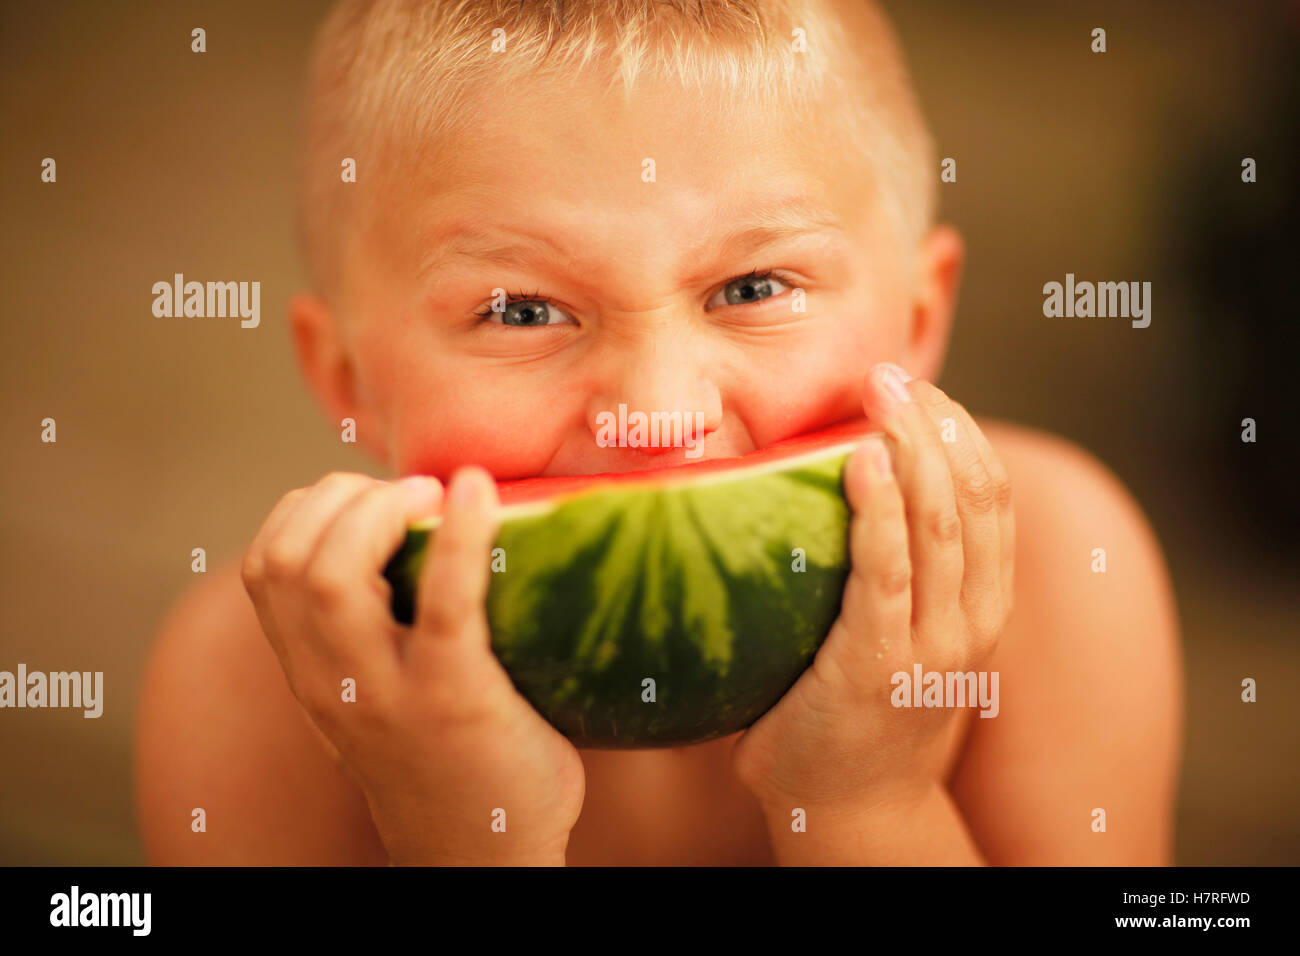 Boy Eating A Slice Of Watermelon Stock Photo